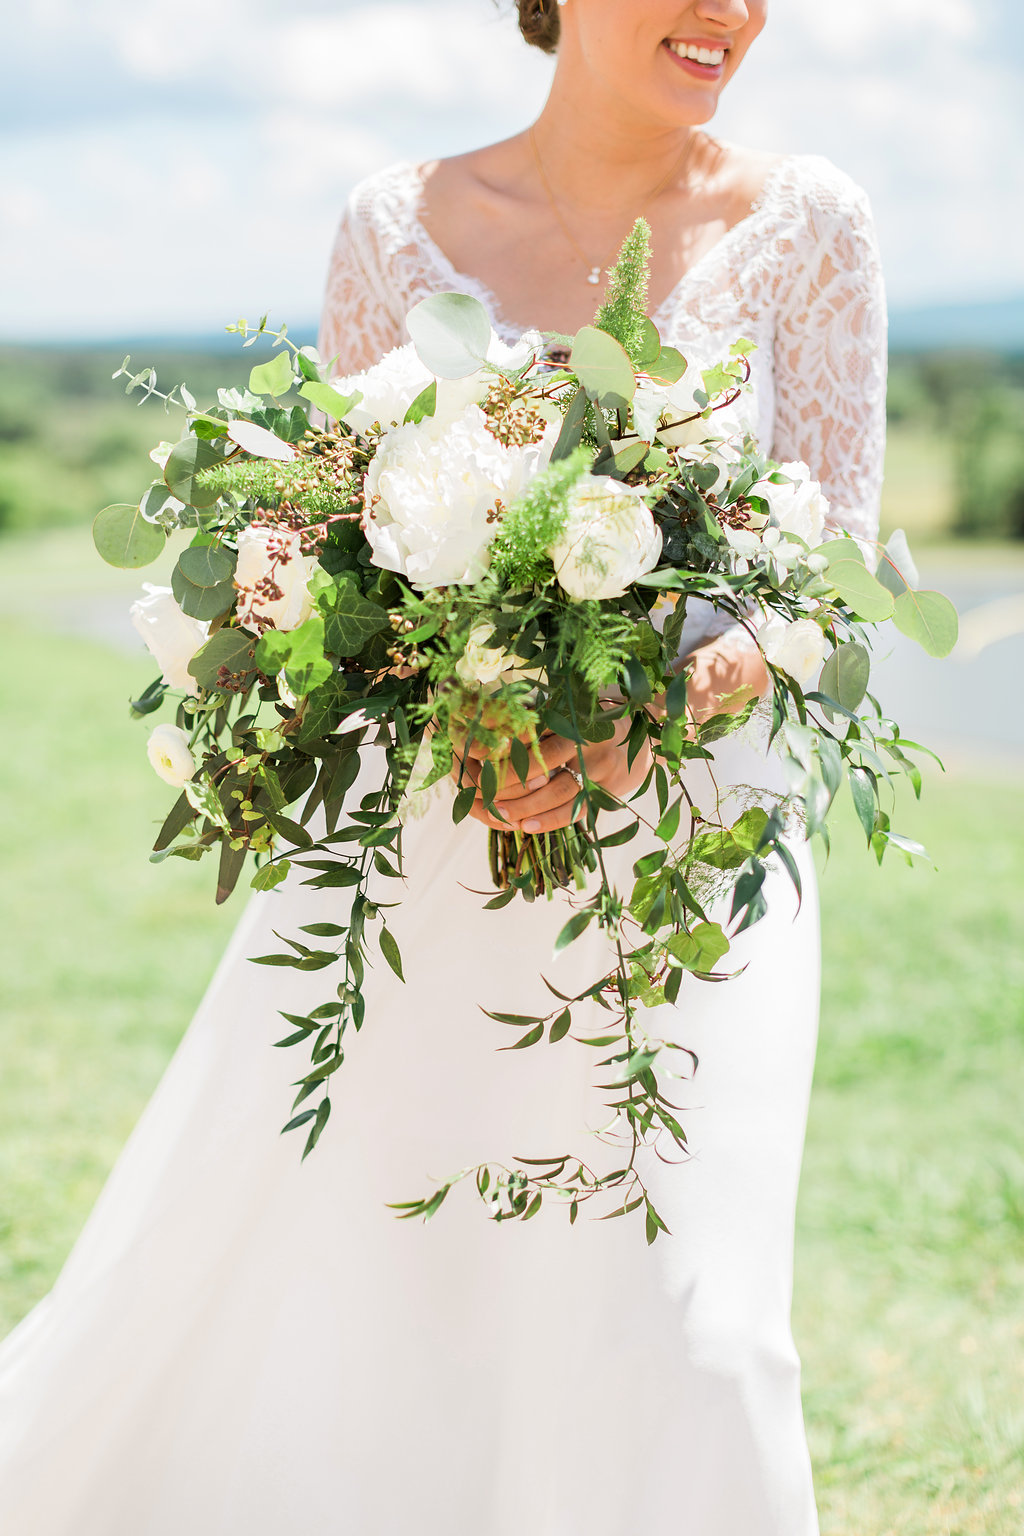 Bouquet with Overflowing Greenery